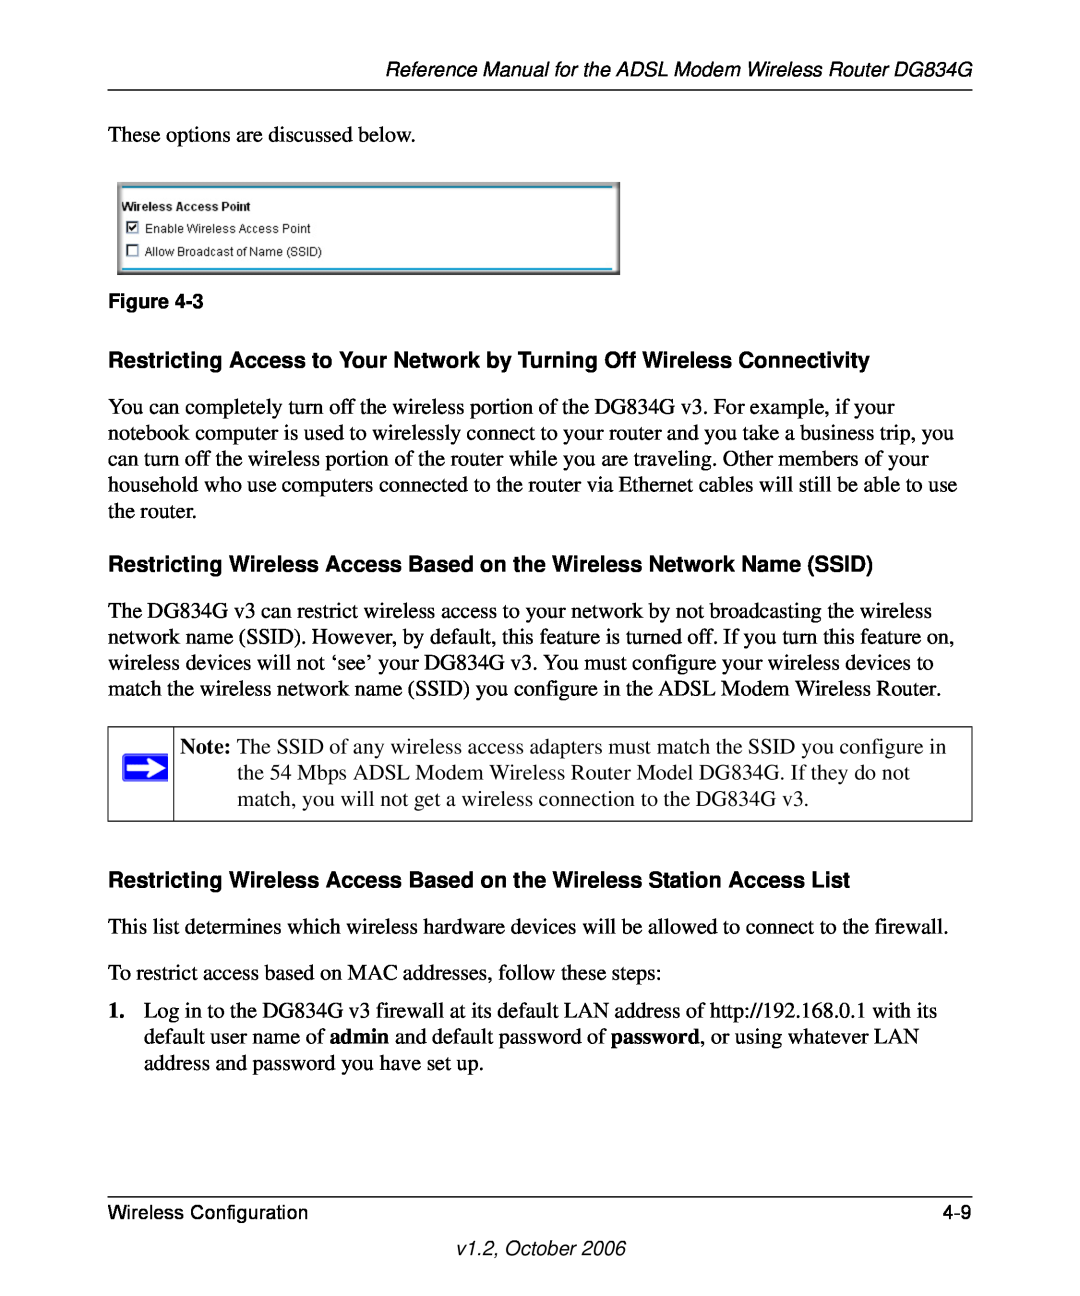 NETGEAR DG834G manual Restricting Wireless Access Based on the Wireless Network Name SSID 